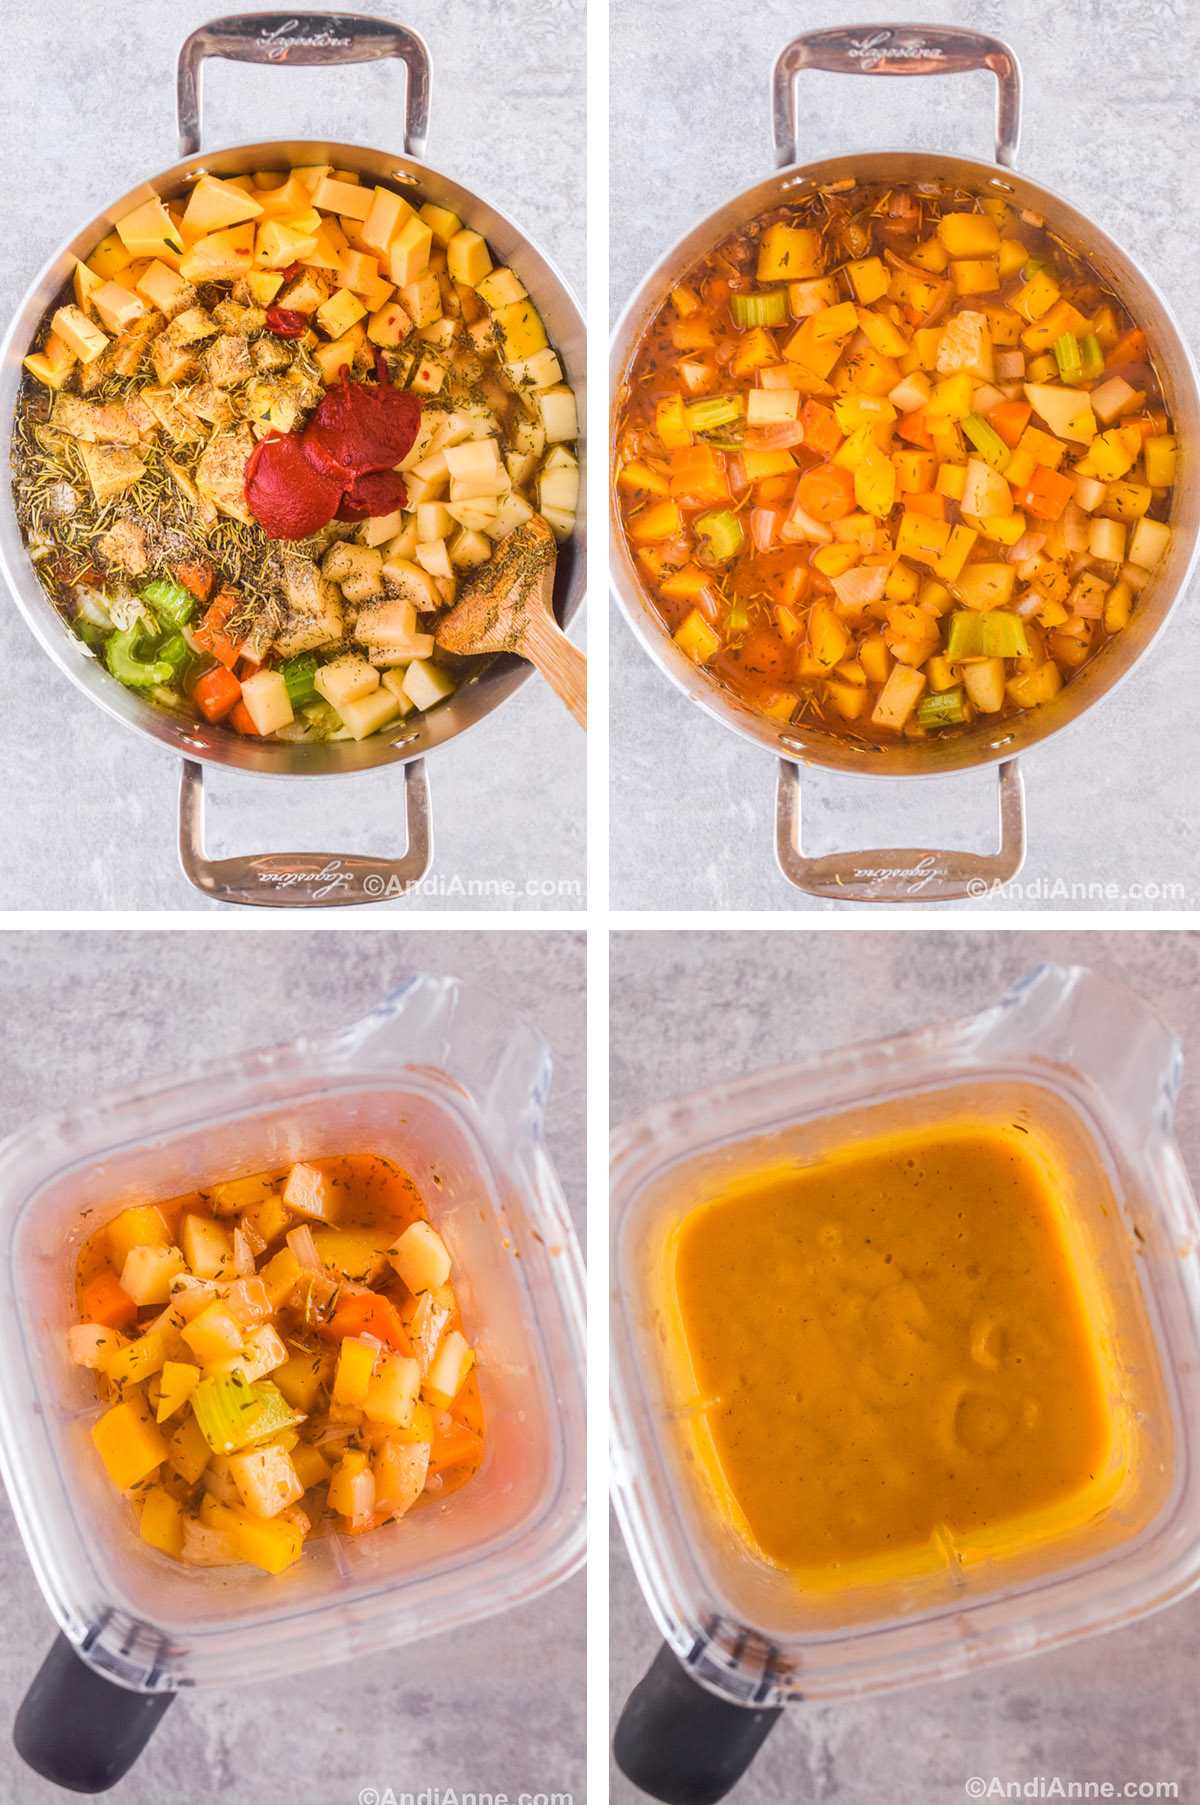 Four images showing steps to make the recipe. First is various vegetables and squash dumped in a pot with spices and tomato paste poured on top. Second is cooked squash and vegetables in liquid. Third is cooked vegetables in a blender cup. Fourth image is pureed orange colored soup. 